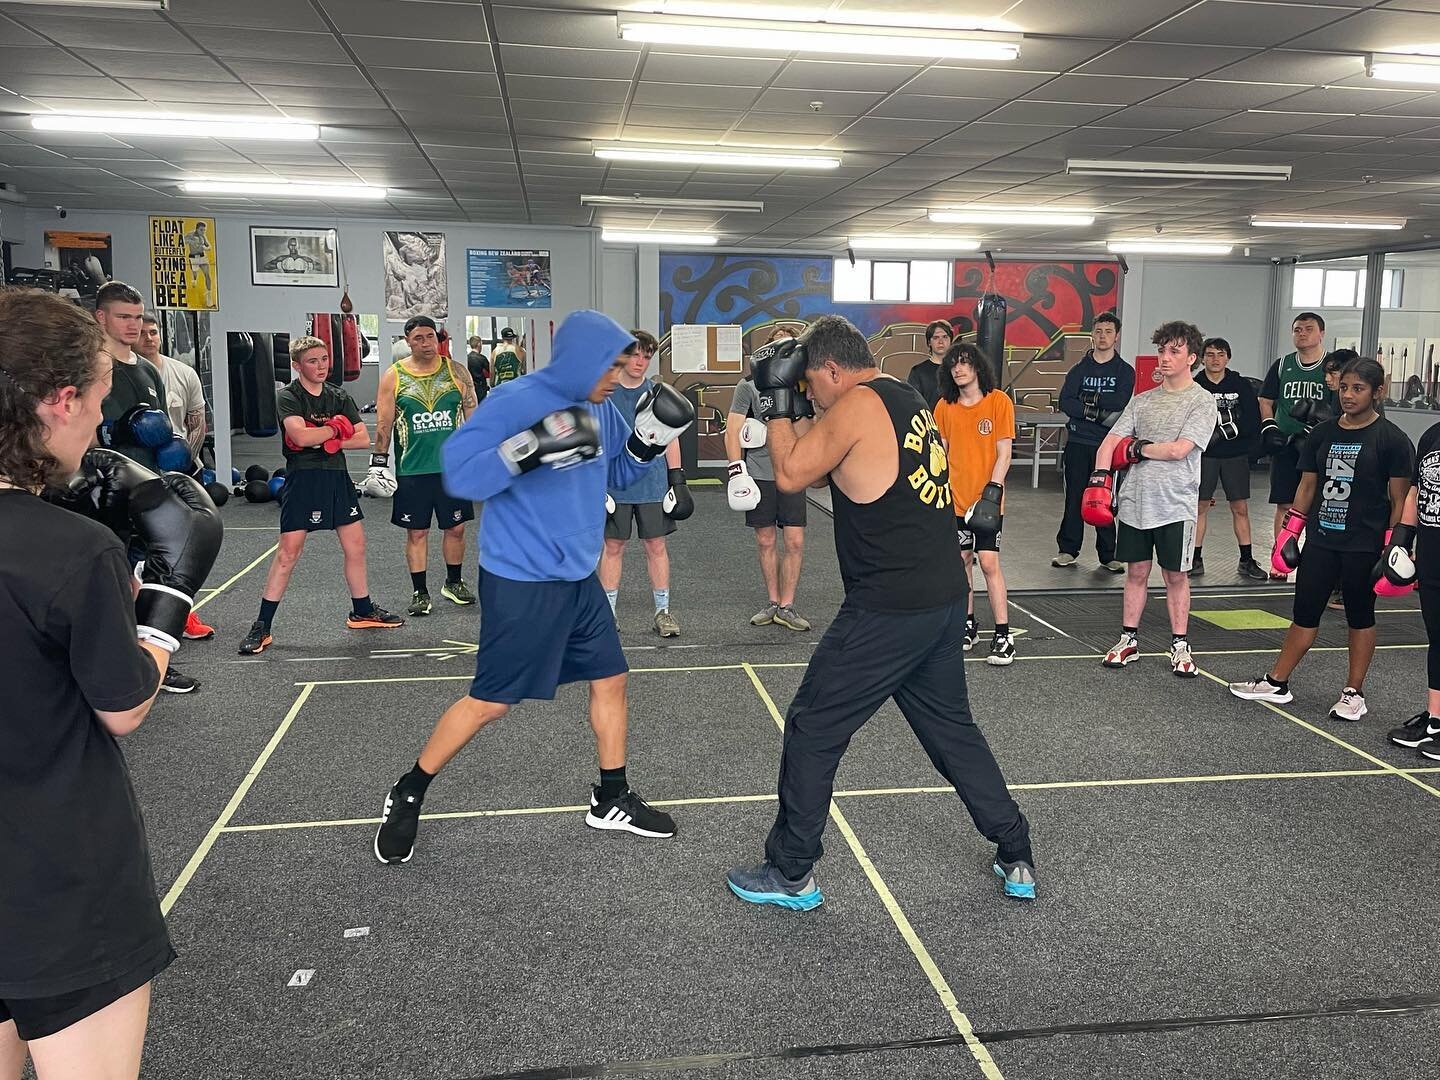 Catch one of our coaches, &ldquo;The Ninja&rdquo; tonight at our Wednesday Boxing class 6pm! He&rsquo;ll be taking you through a challenging workout, while sharpening your boxing fundamentals 🥊

Sparring from 6:30 pm onwards.
Kids boxing 4:30 - 5:15